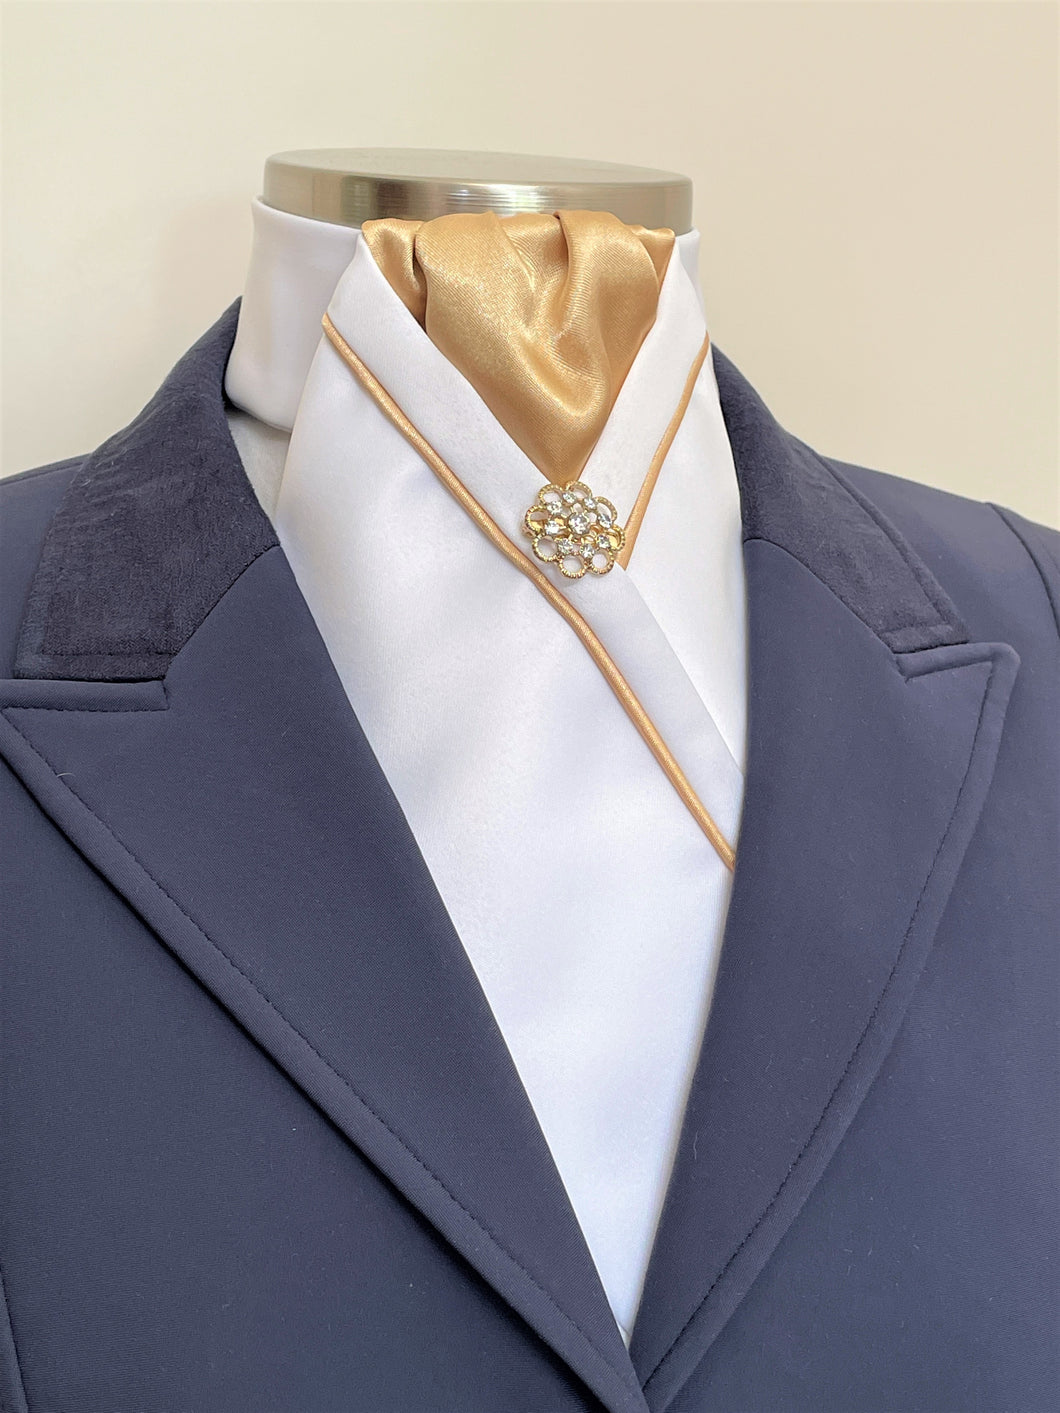 ERA KATE STOCK TIE - White satin, gold with gold satin piping & gold brooch